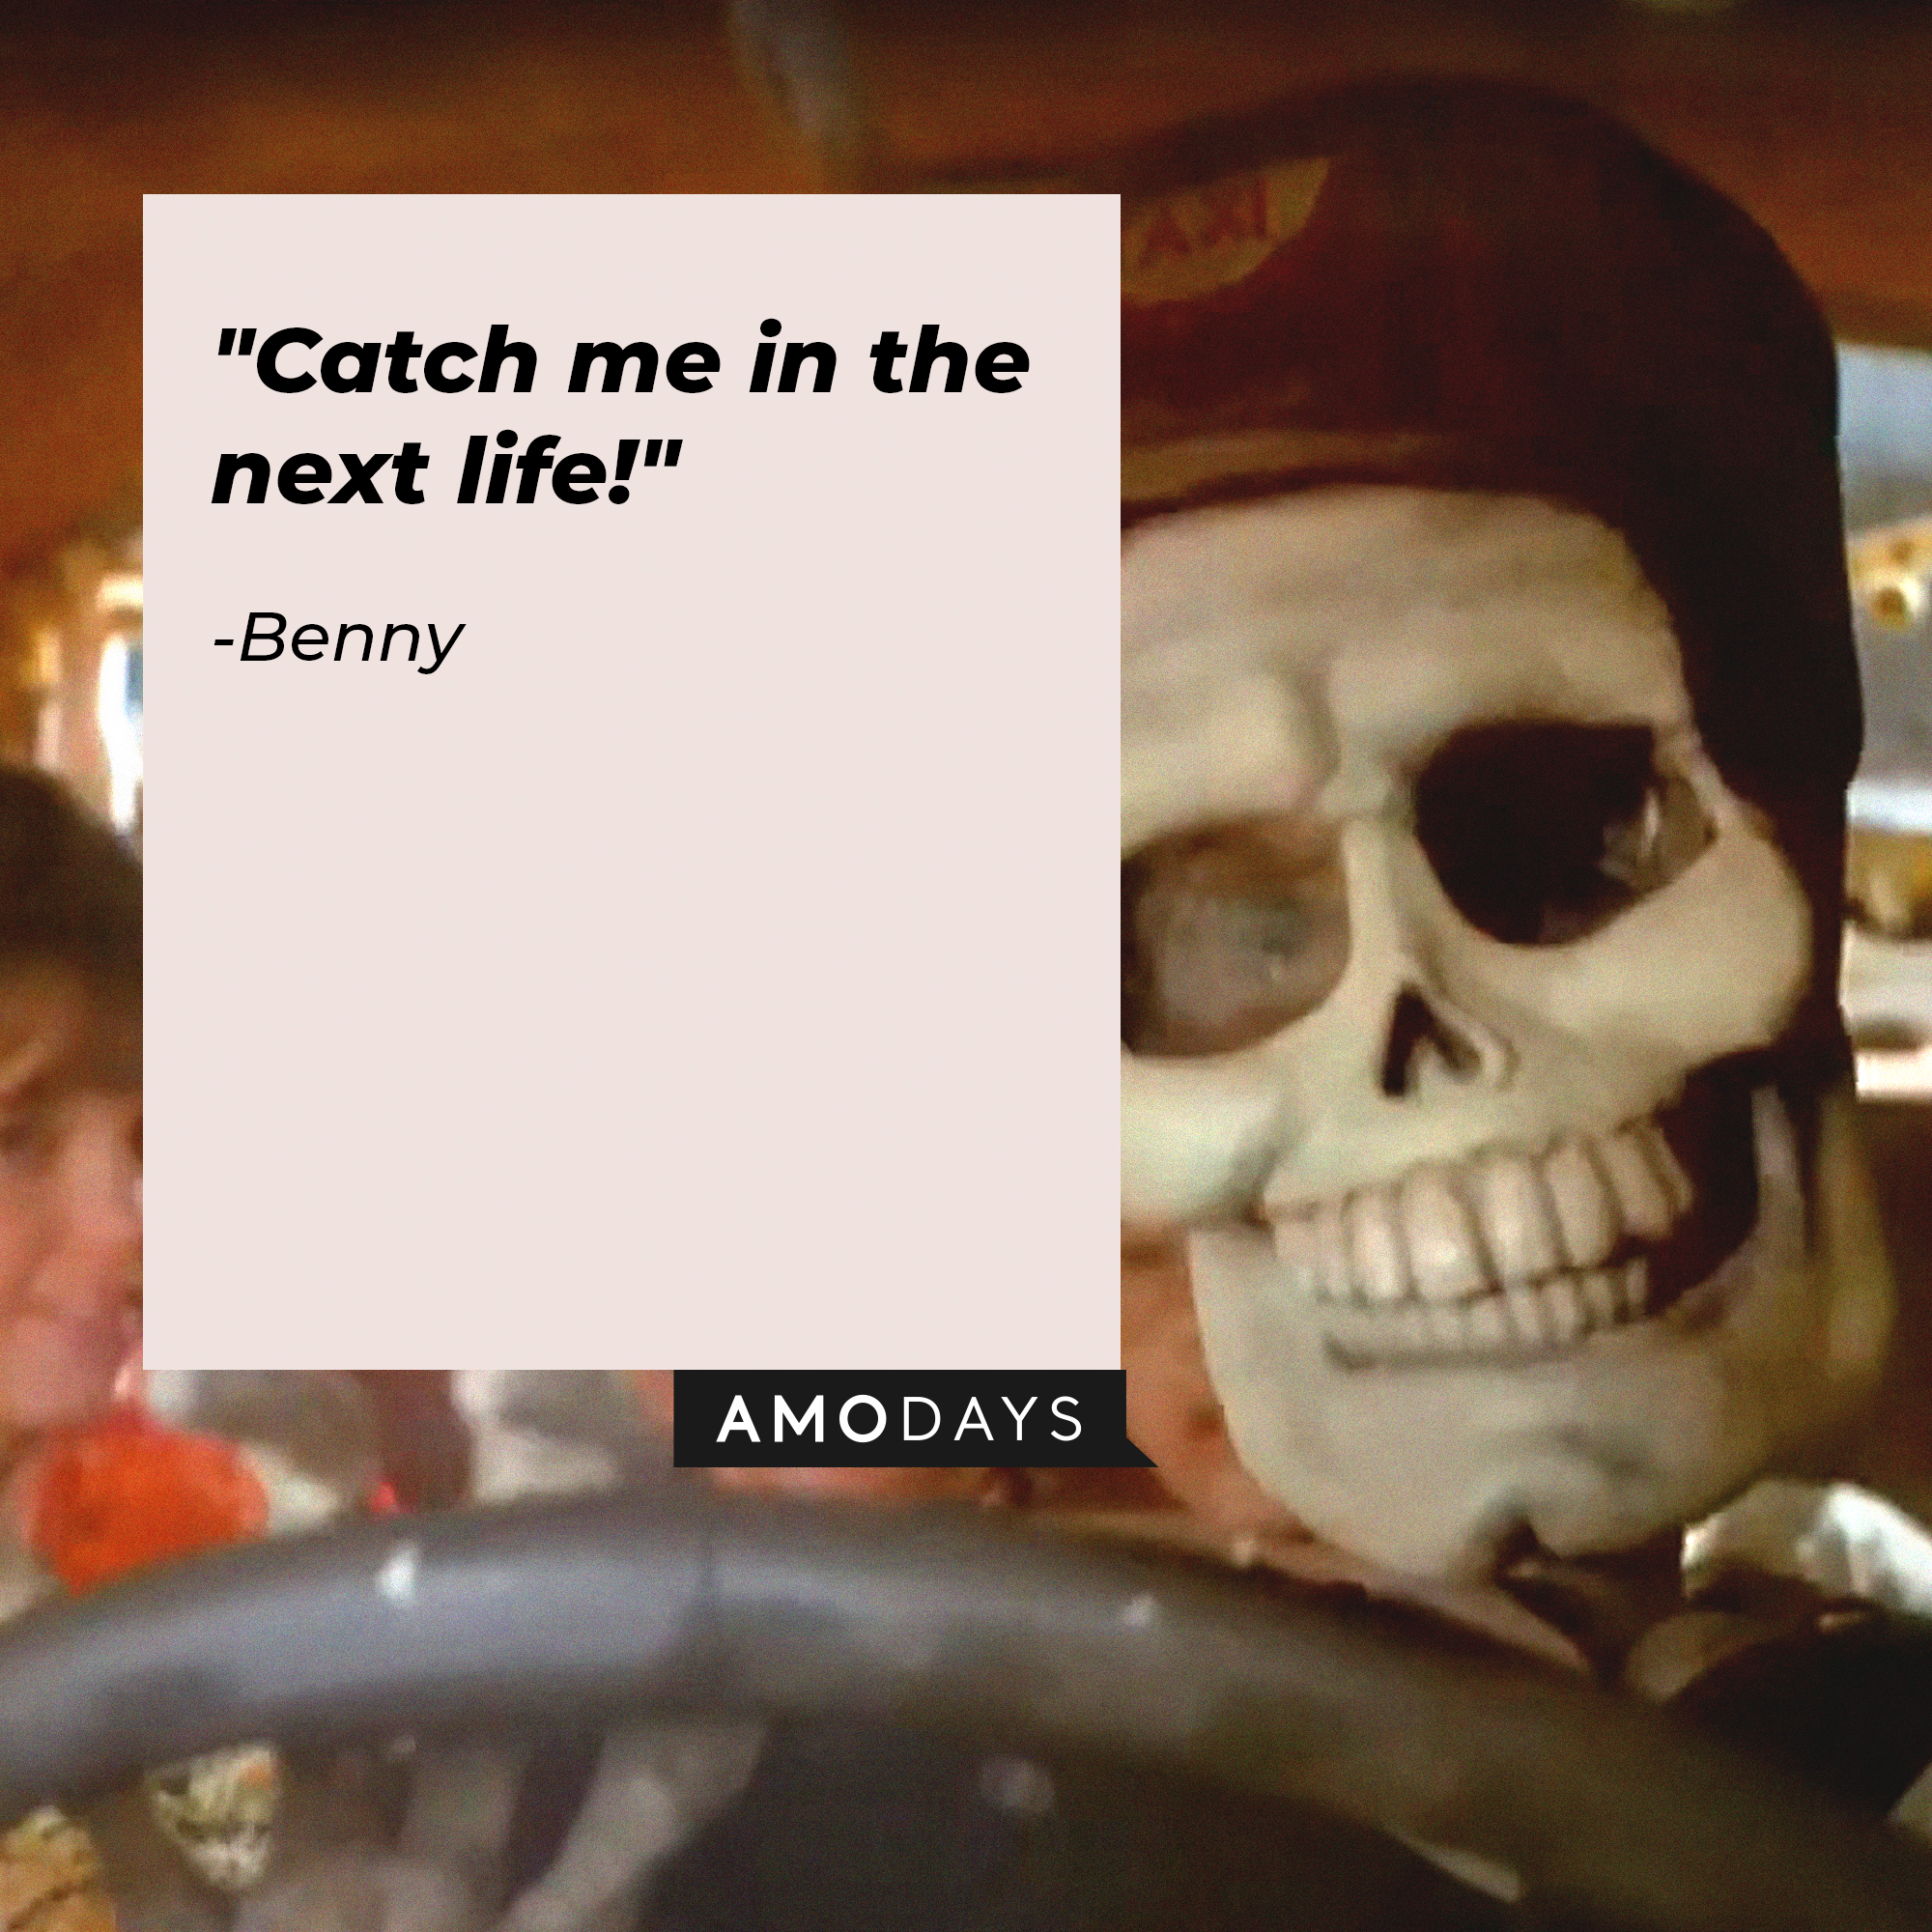 Benny's quote: "Catch me in the next life!" | Source: Youtube.com/disneychannel